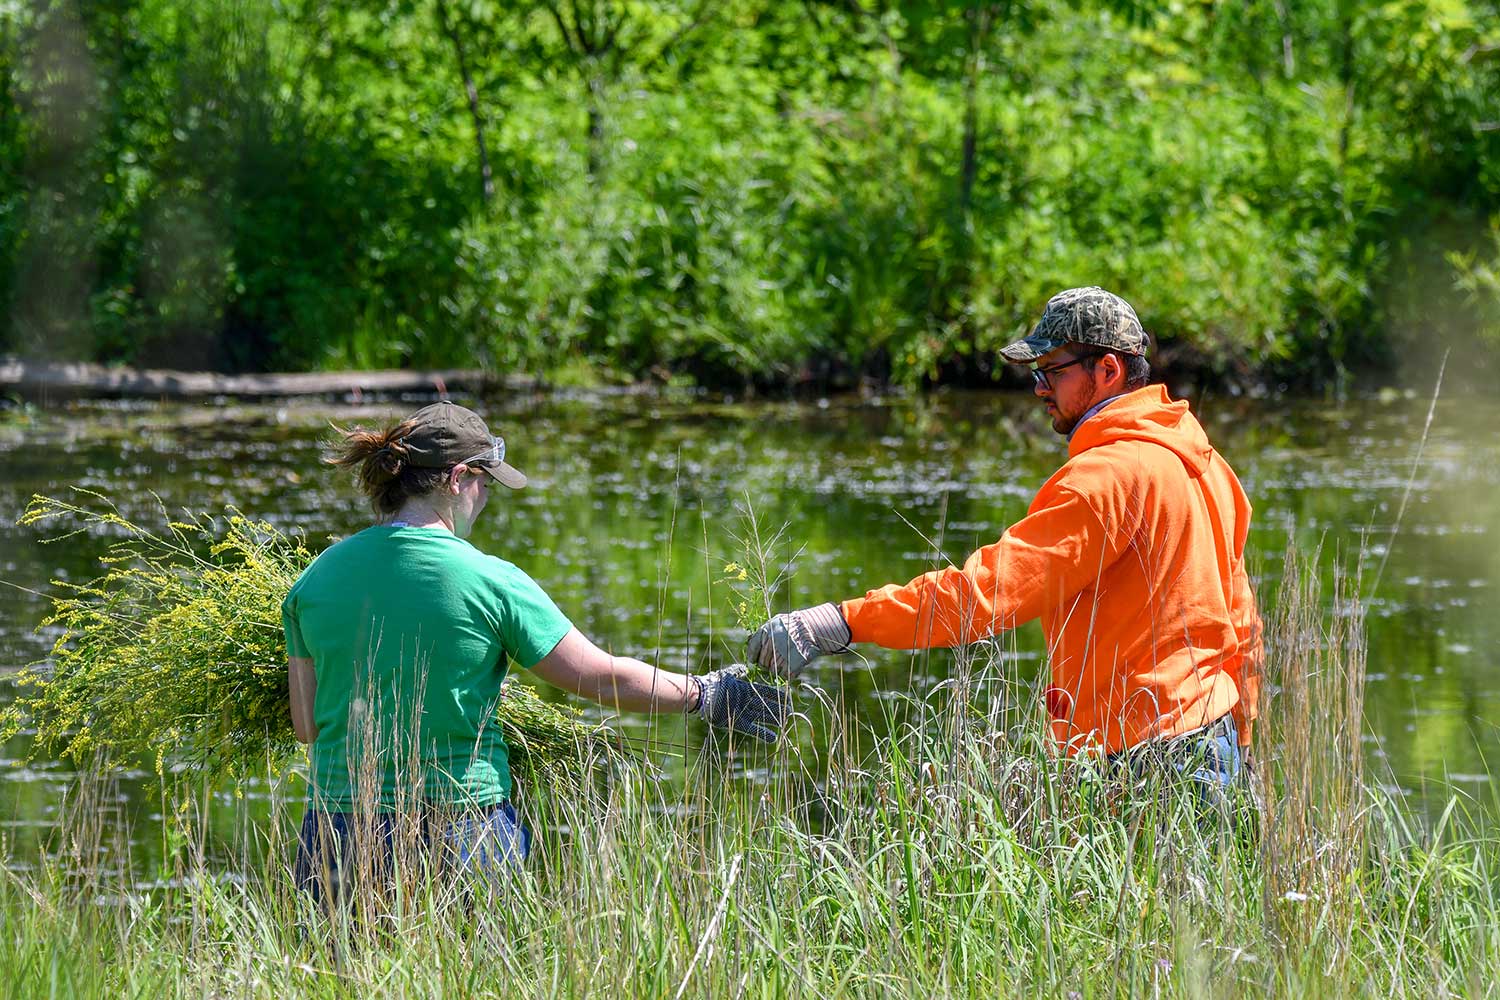 A person handing a just removed plant to a person carrying an armful of cut vegetation while standing in a grassy area near water.